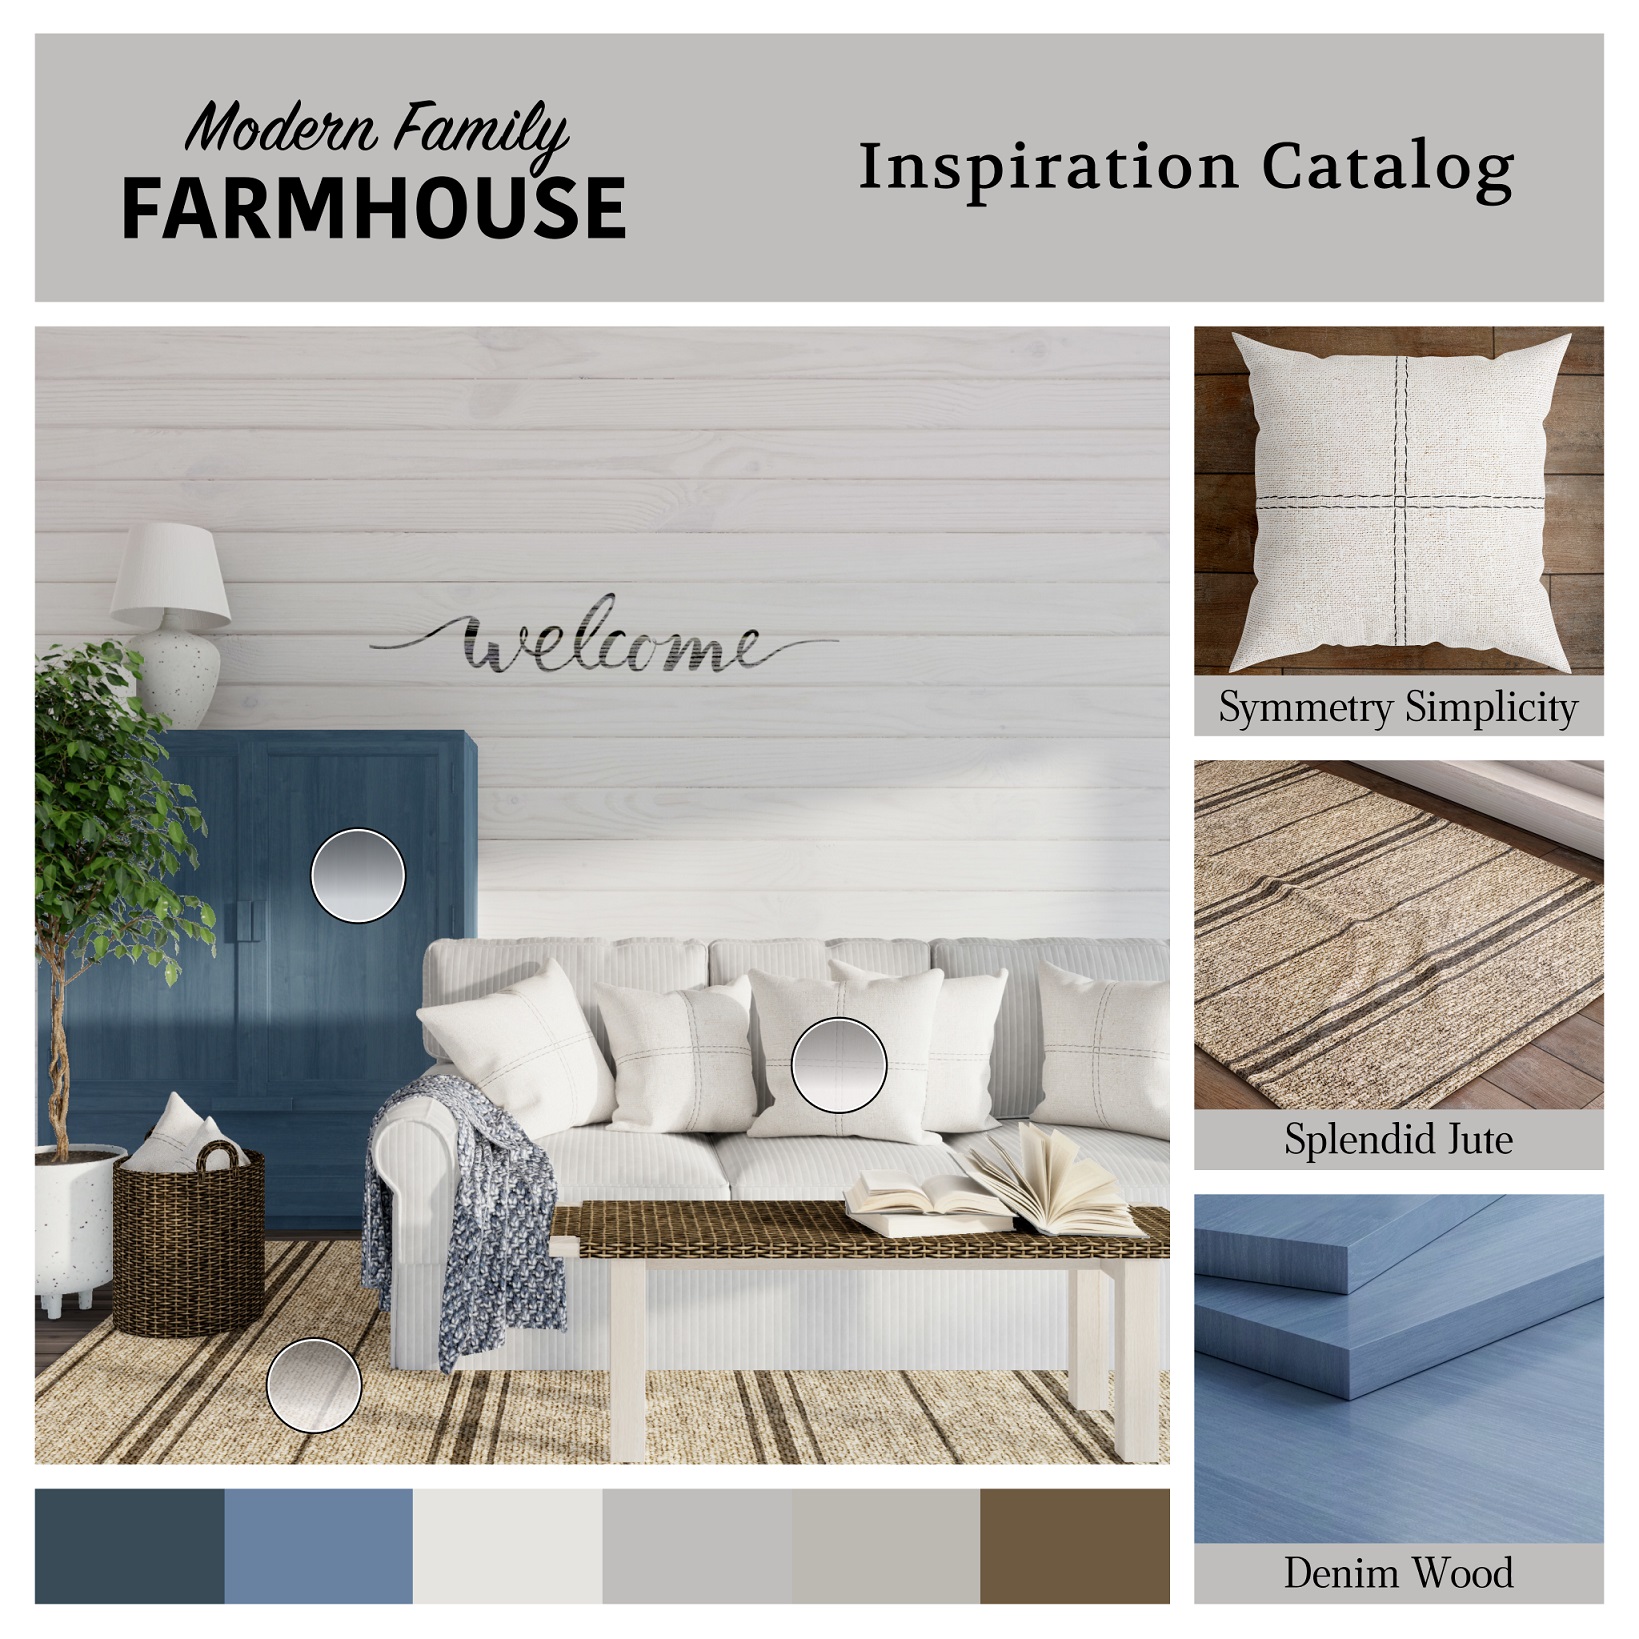 redecor style guide and inspiration catalogue, living room in rustic farmhouse style